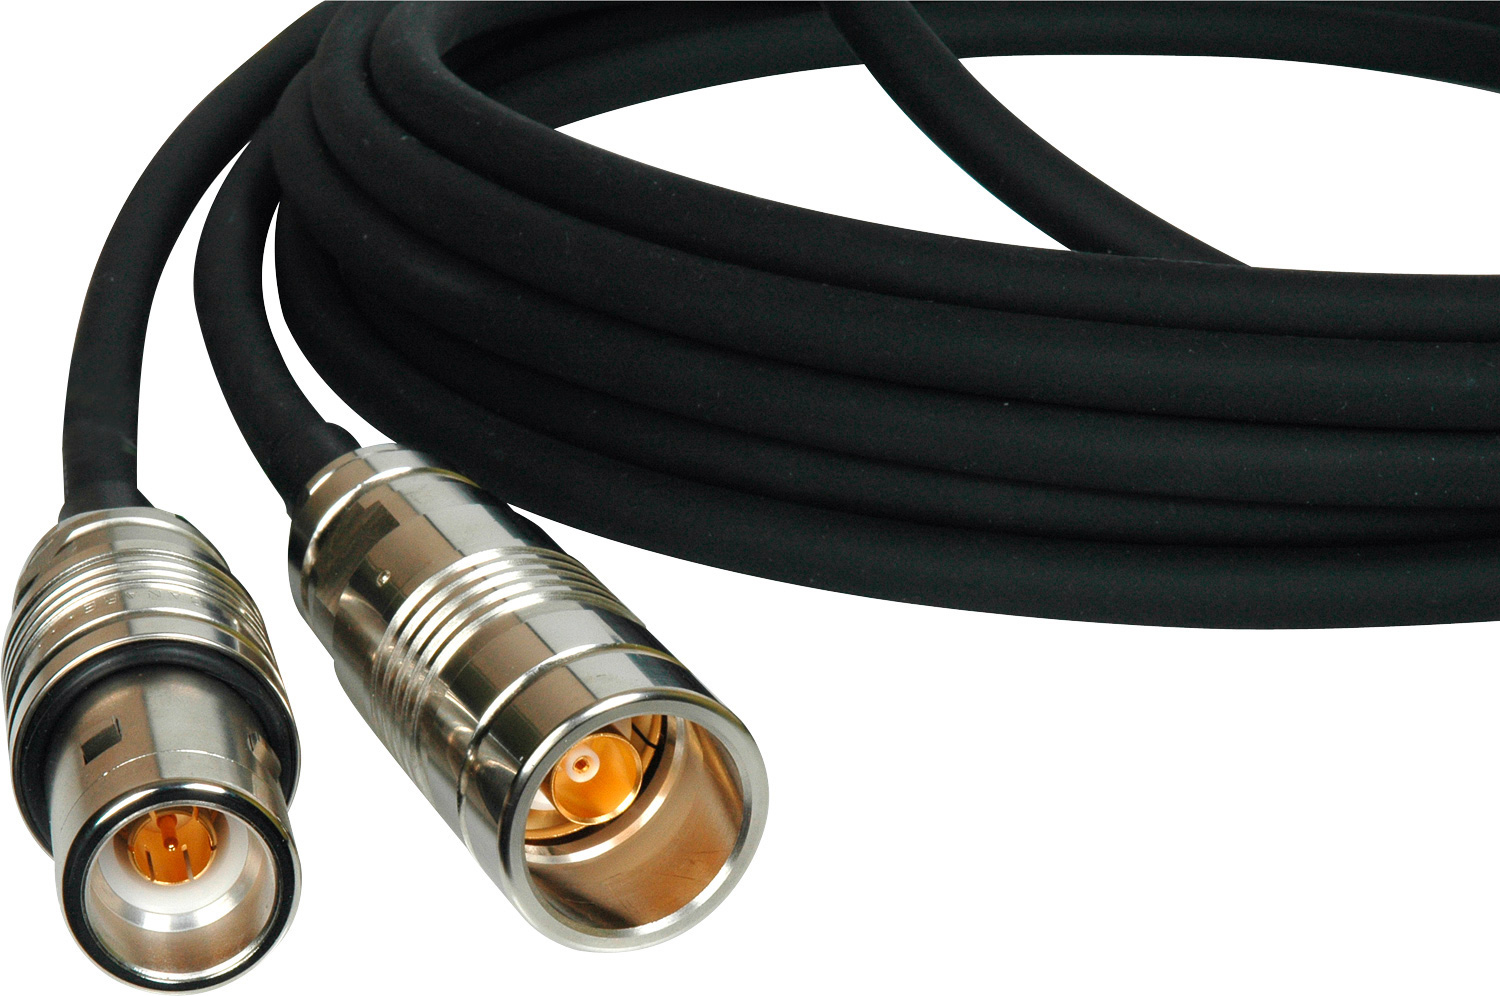 Laird TRI-1857A-328 Belden 1857A RG59/U Stranded Triax Male to Female Cable - 328 Foot